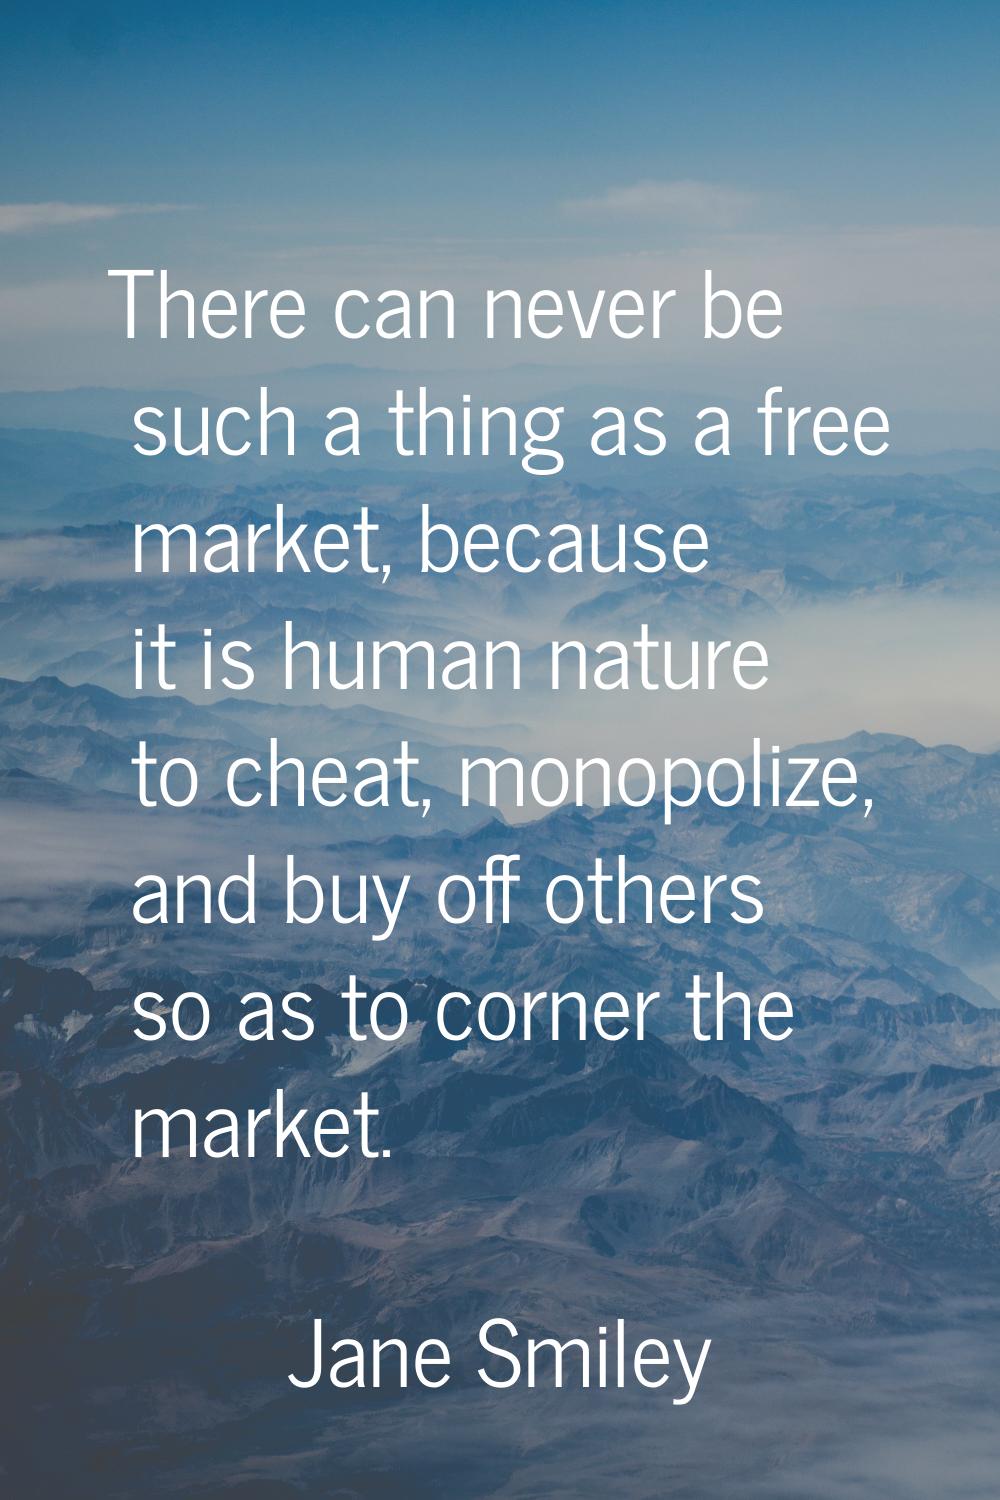 There can never be such a thing as a free market, because it is human nature to cheat, monopolize, 